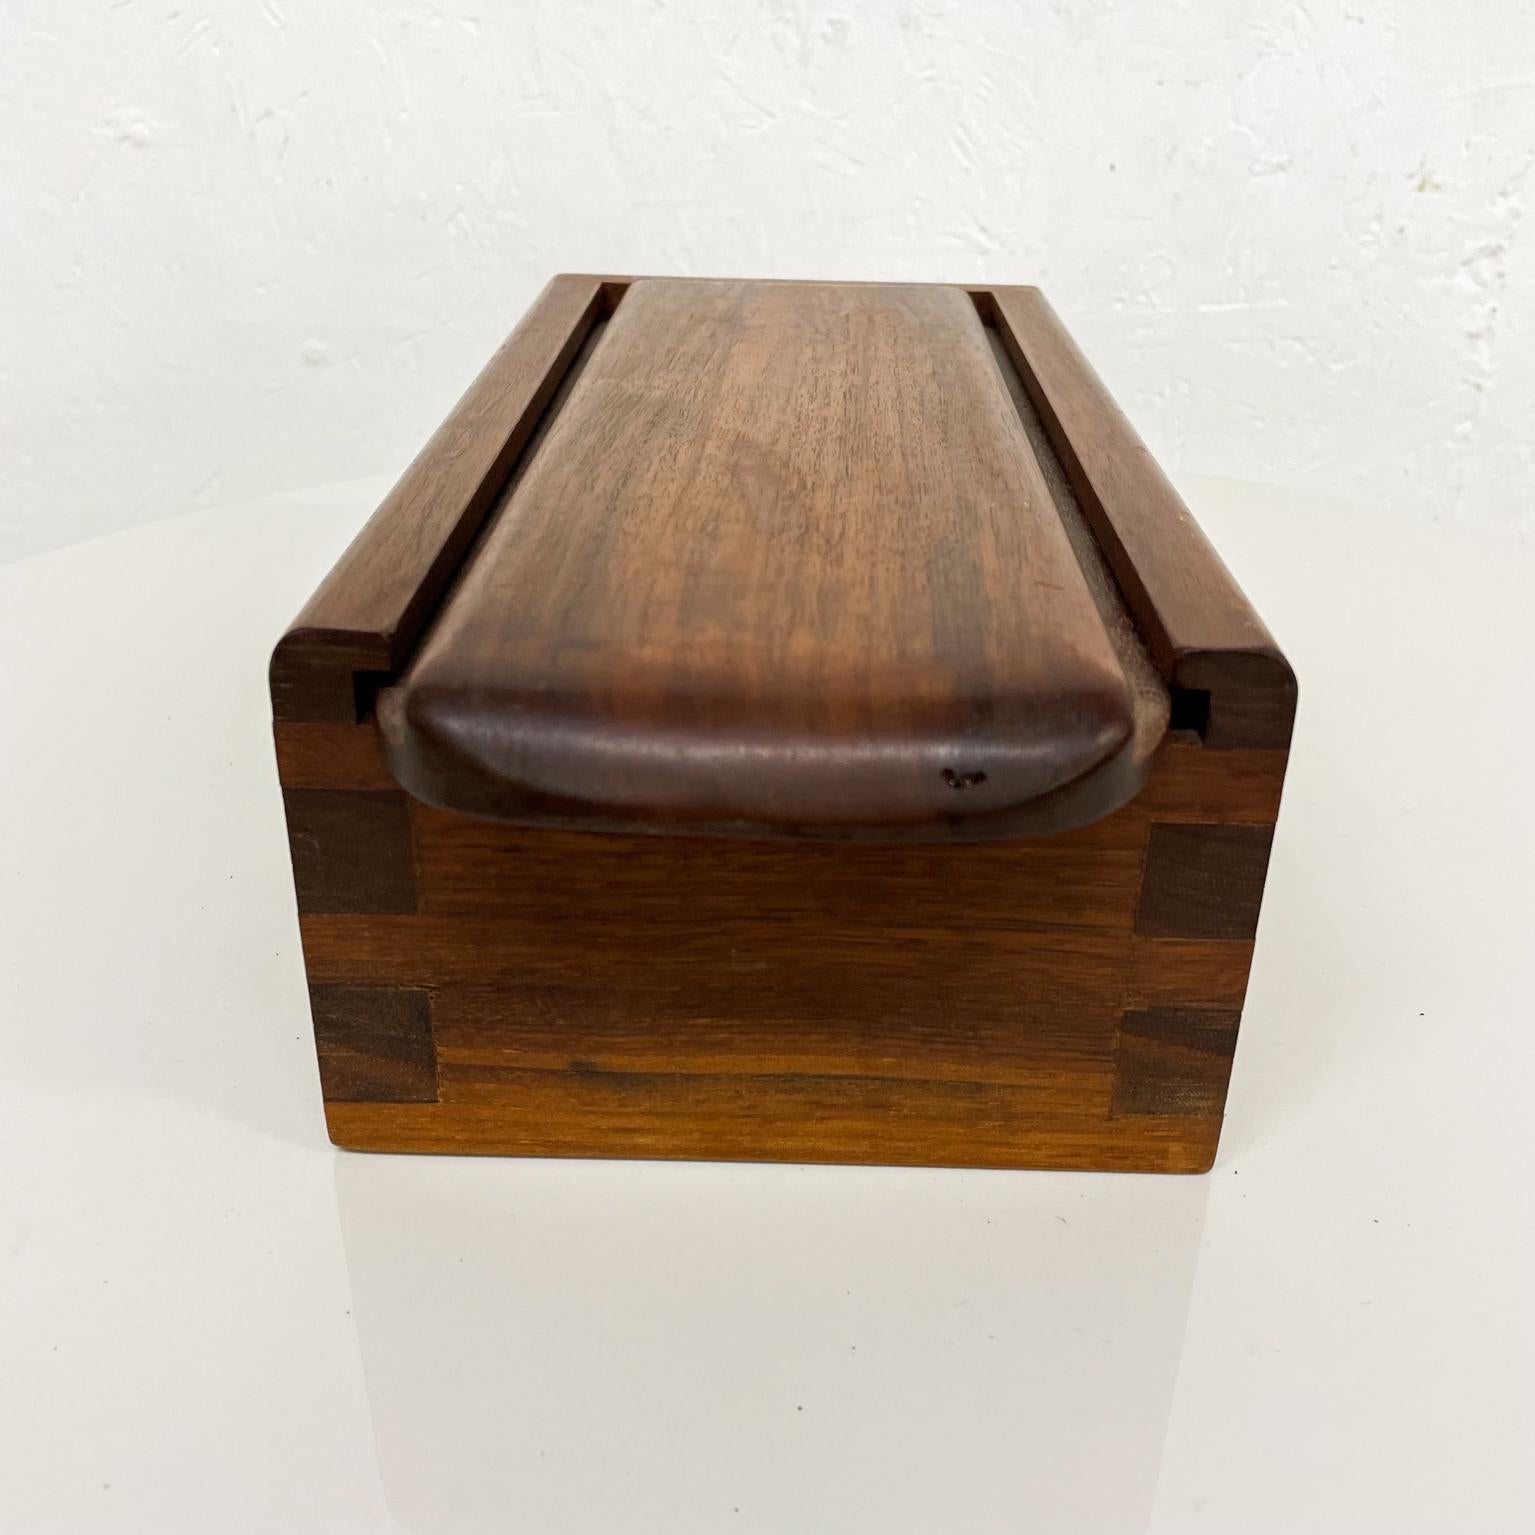 1960s Studio Piece Walnut Wood Box Slide Open Clean Design Style of Nakashima In Good Condition For Sale In Chula Vista, CA